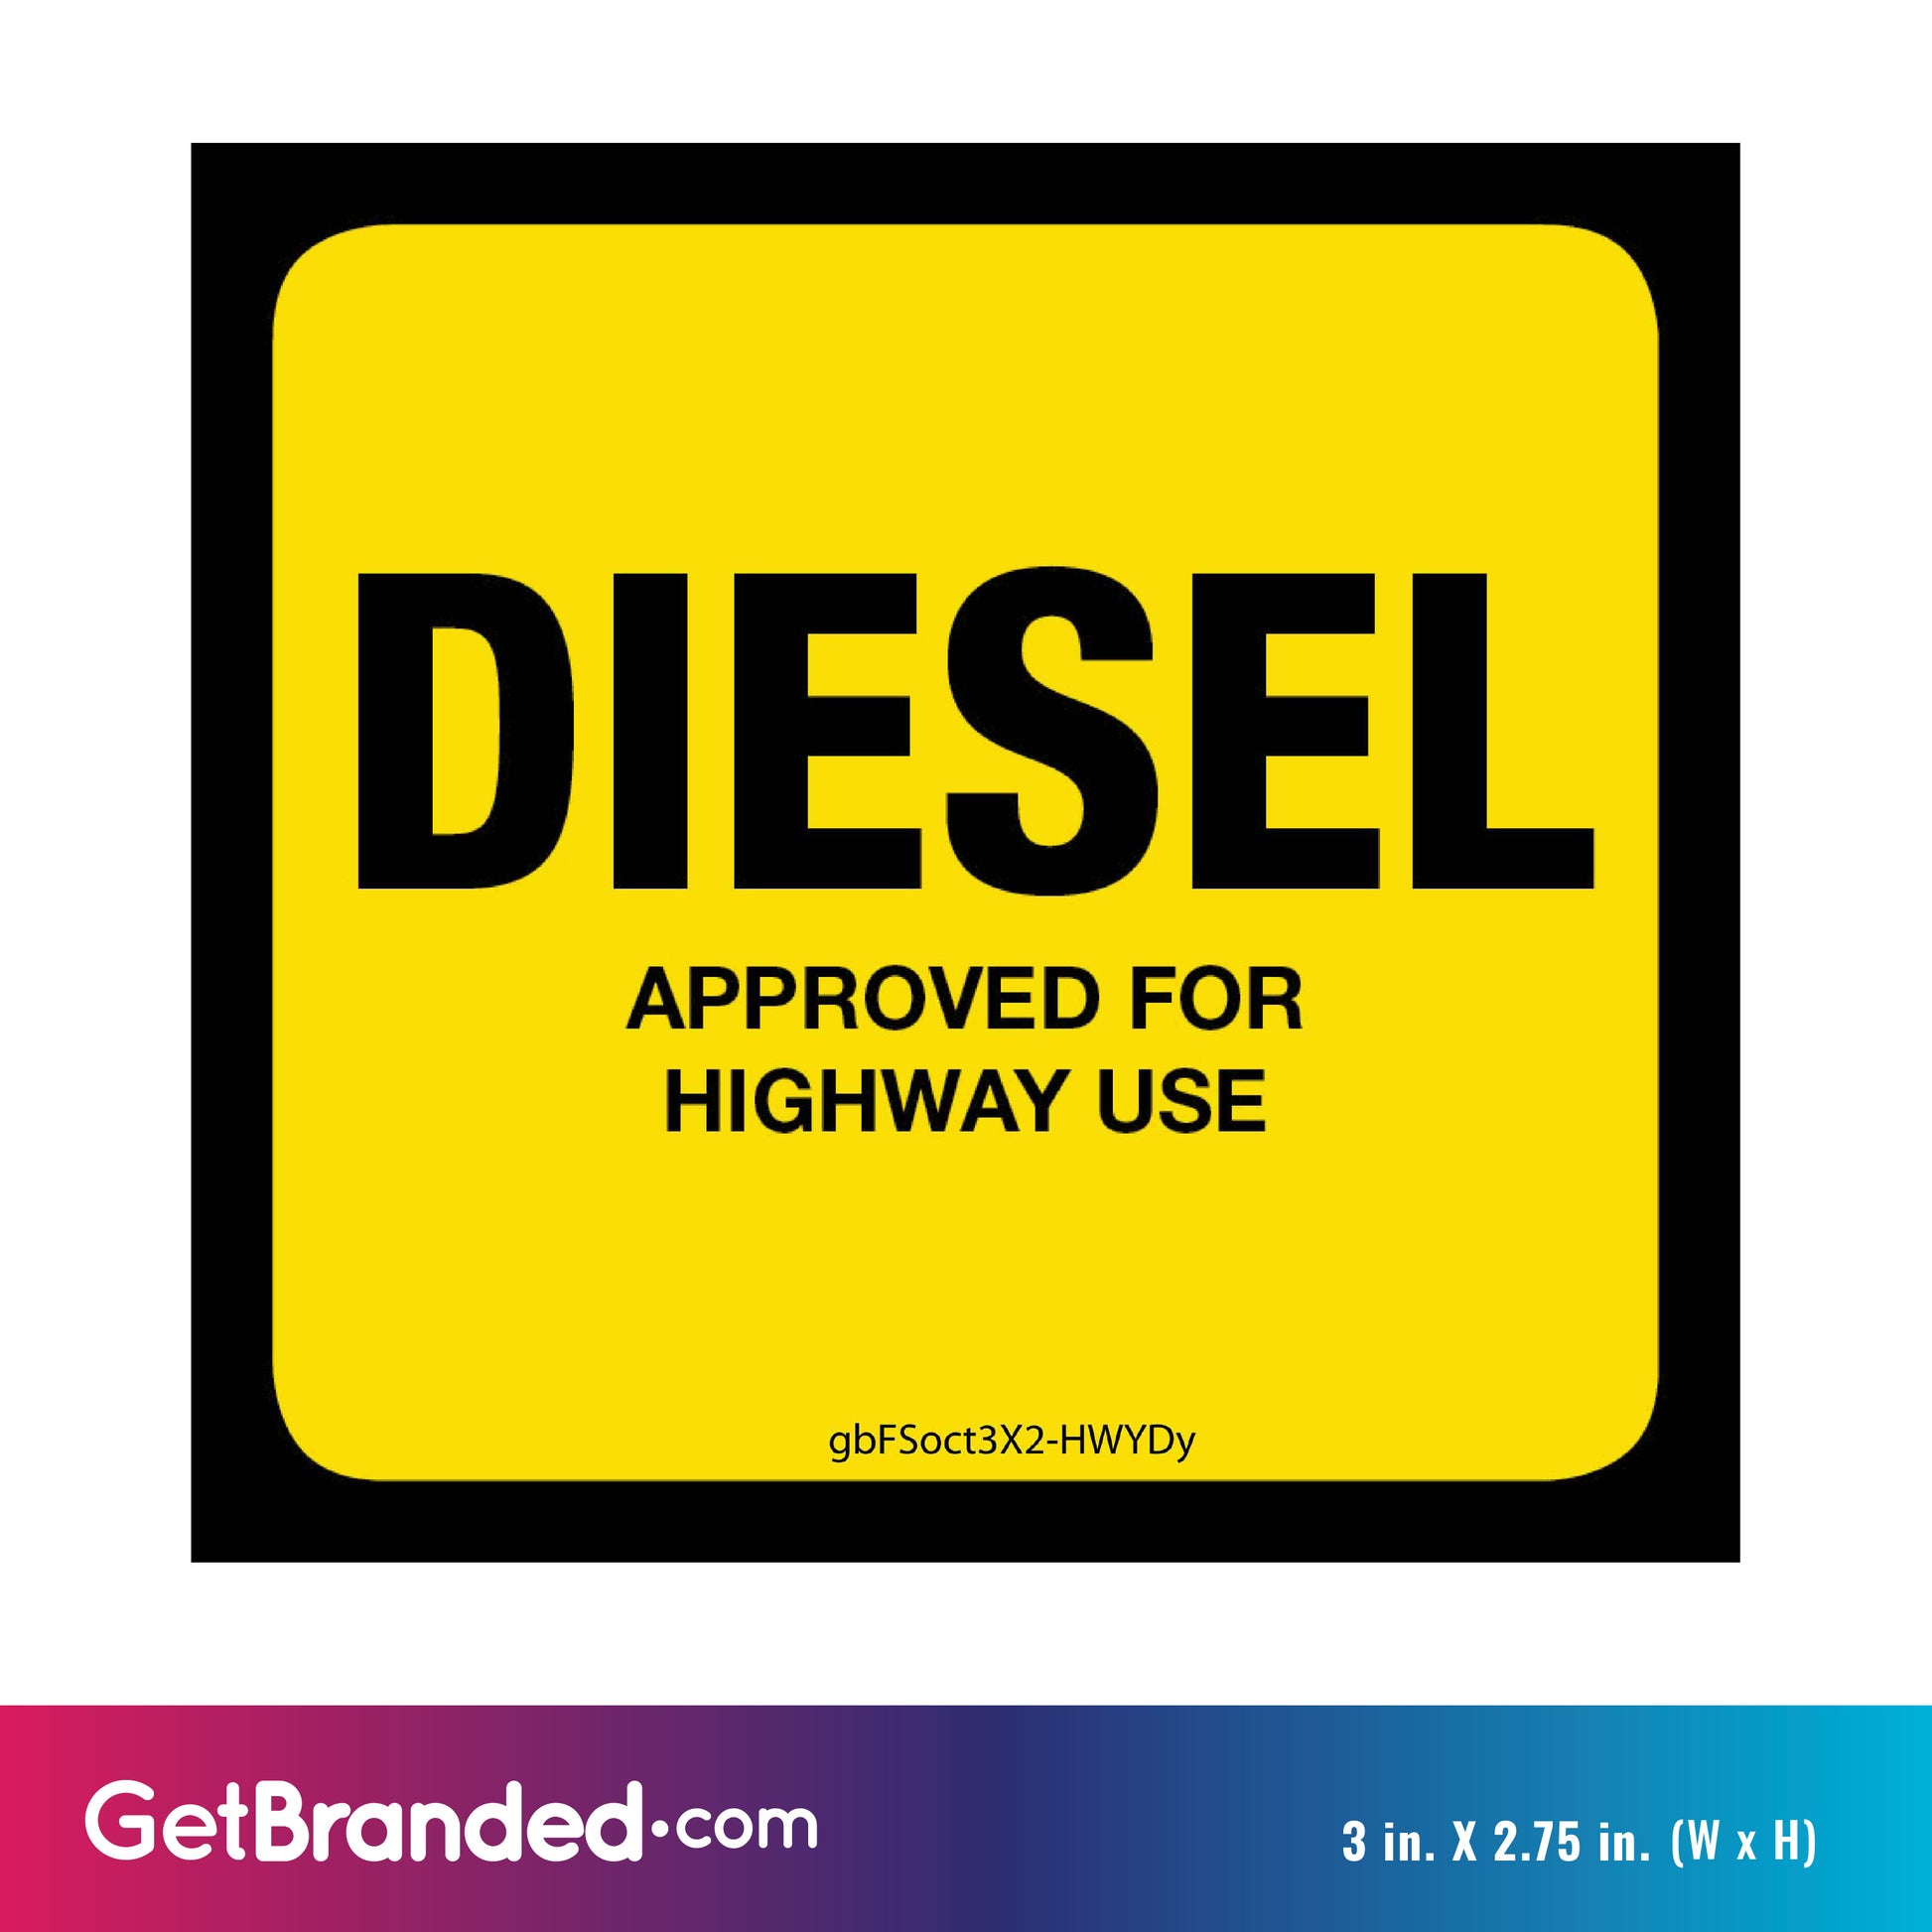 Diesel (On Road) Pump Decal, Yellow size guide.